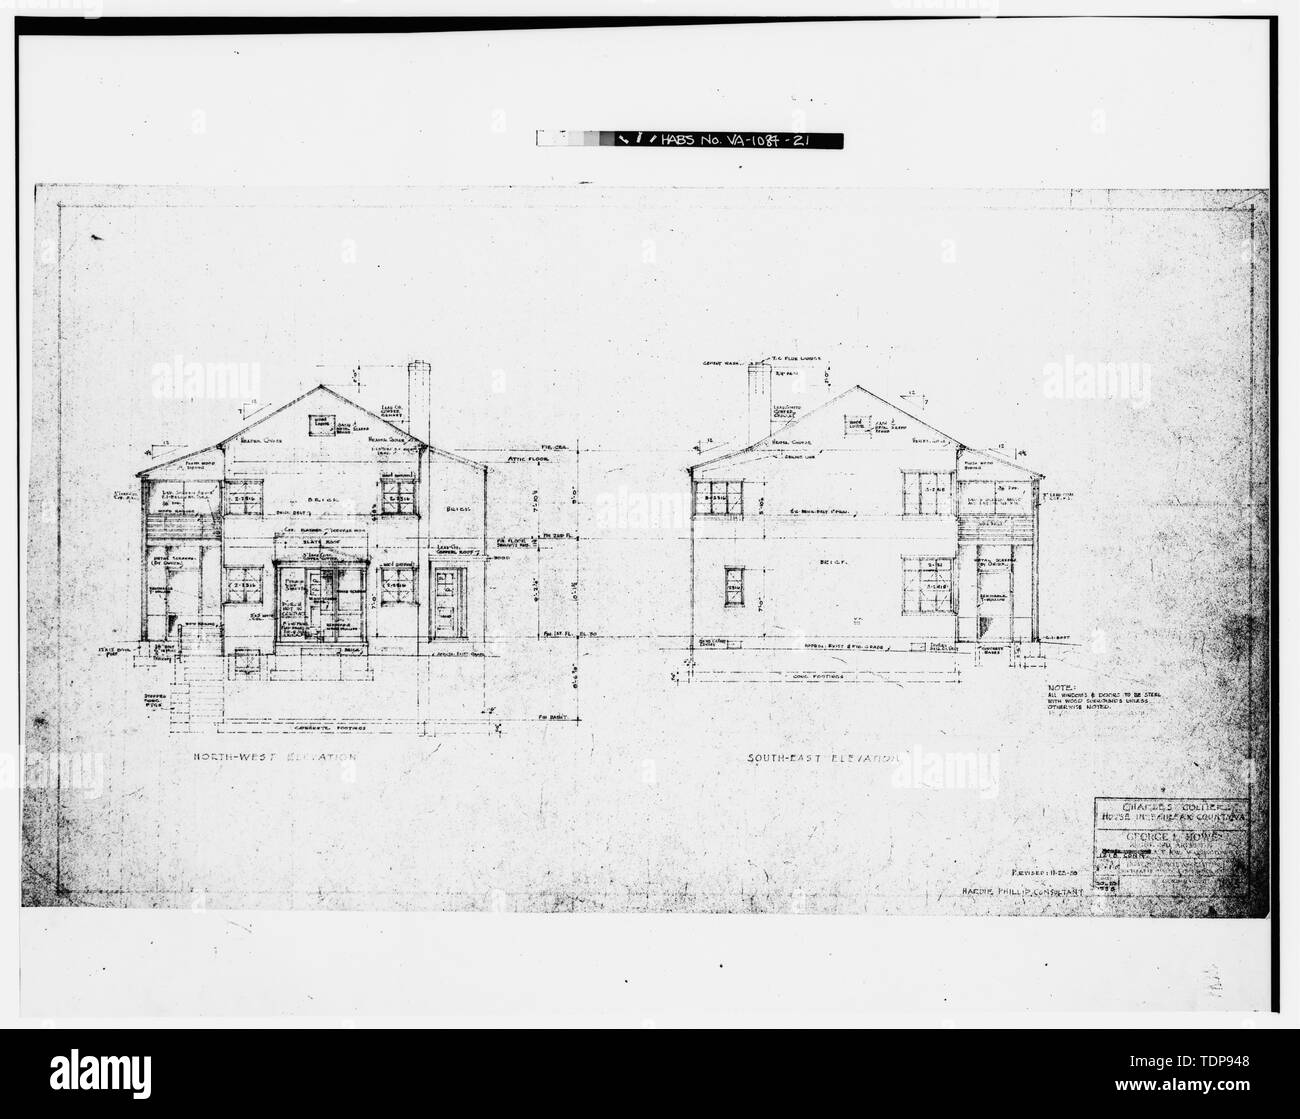 Photocopy of blackline print in possession of Mrs. William L. Reno. Original drawing by George Locke Howe, Architect 1938. 'NORTH-WEST ELEVATION' AND 'SOUTH-EAST ELEVATION' - Mr. and Mrs. Charles Collier House, 6080 Leesburg Pike, Falls Church, Falls Church, VA; Howe, George Locke; Keily, Dan; Morris, Scott, transmitter Stock Photo